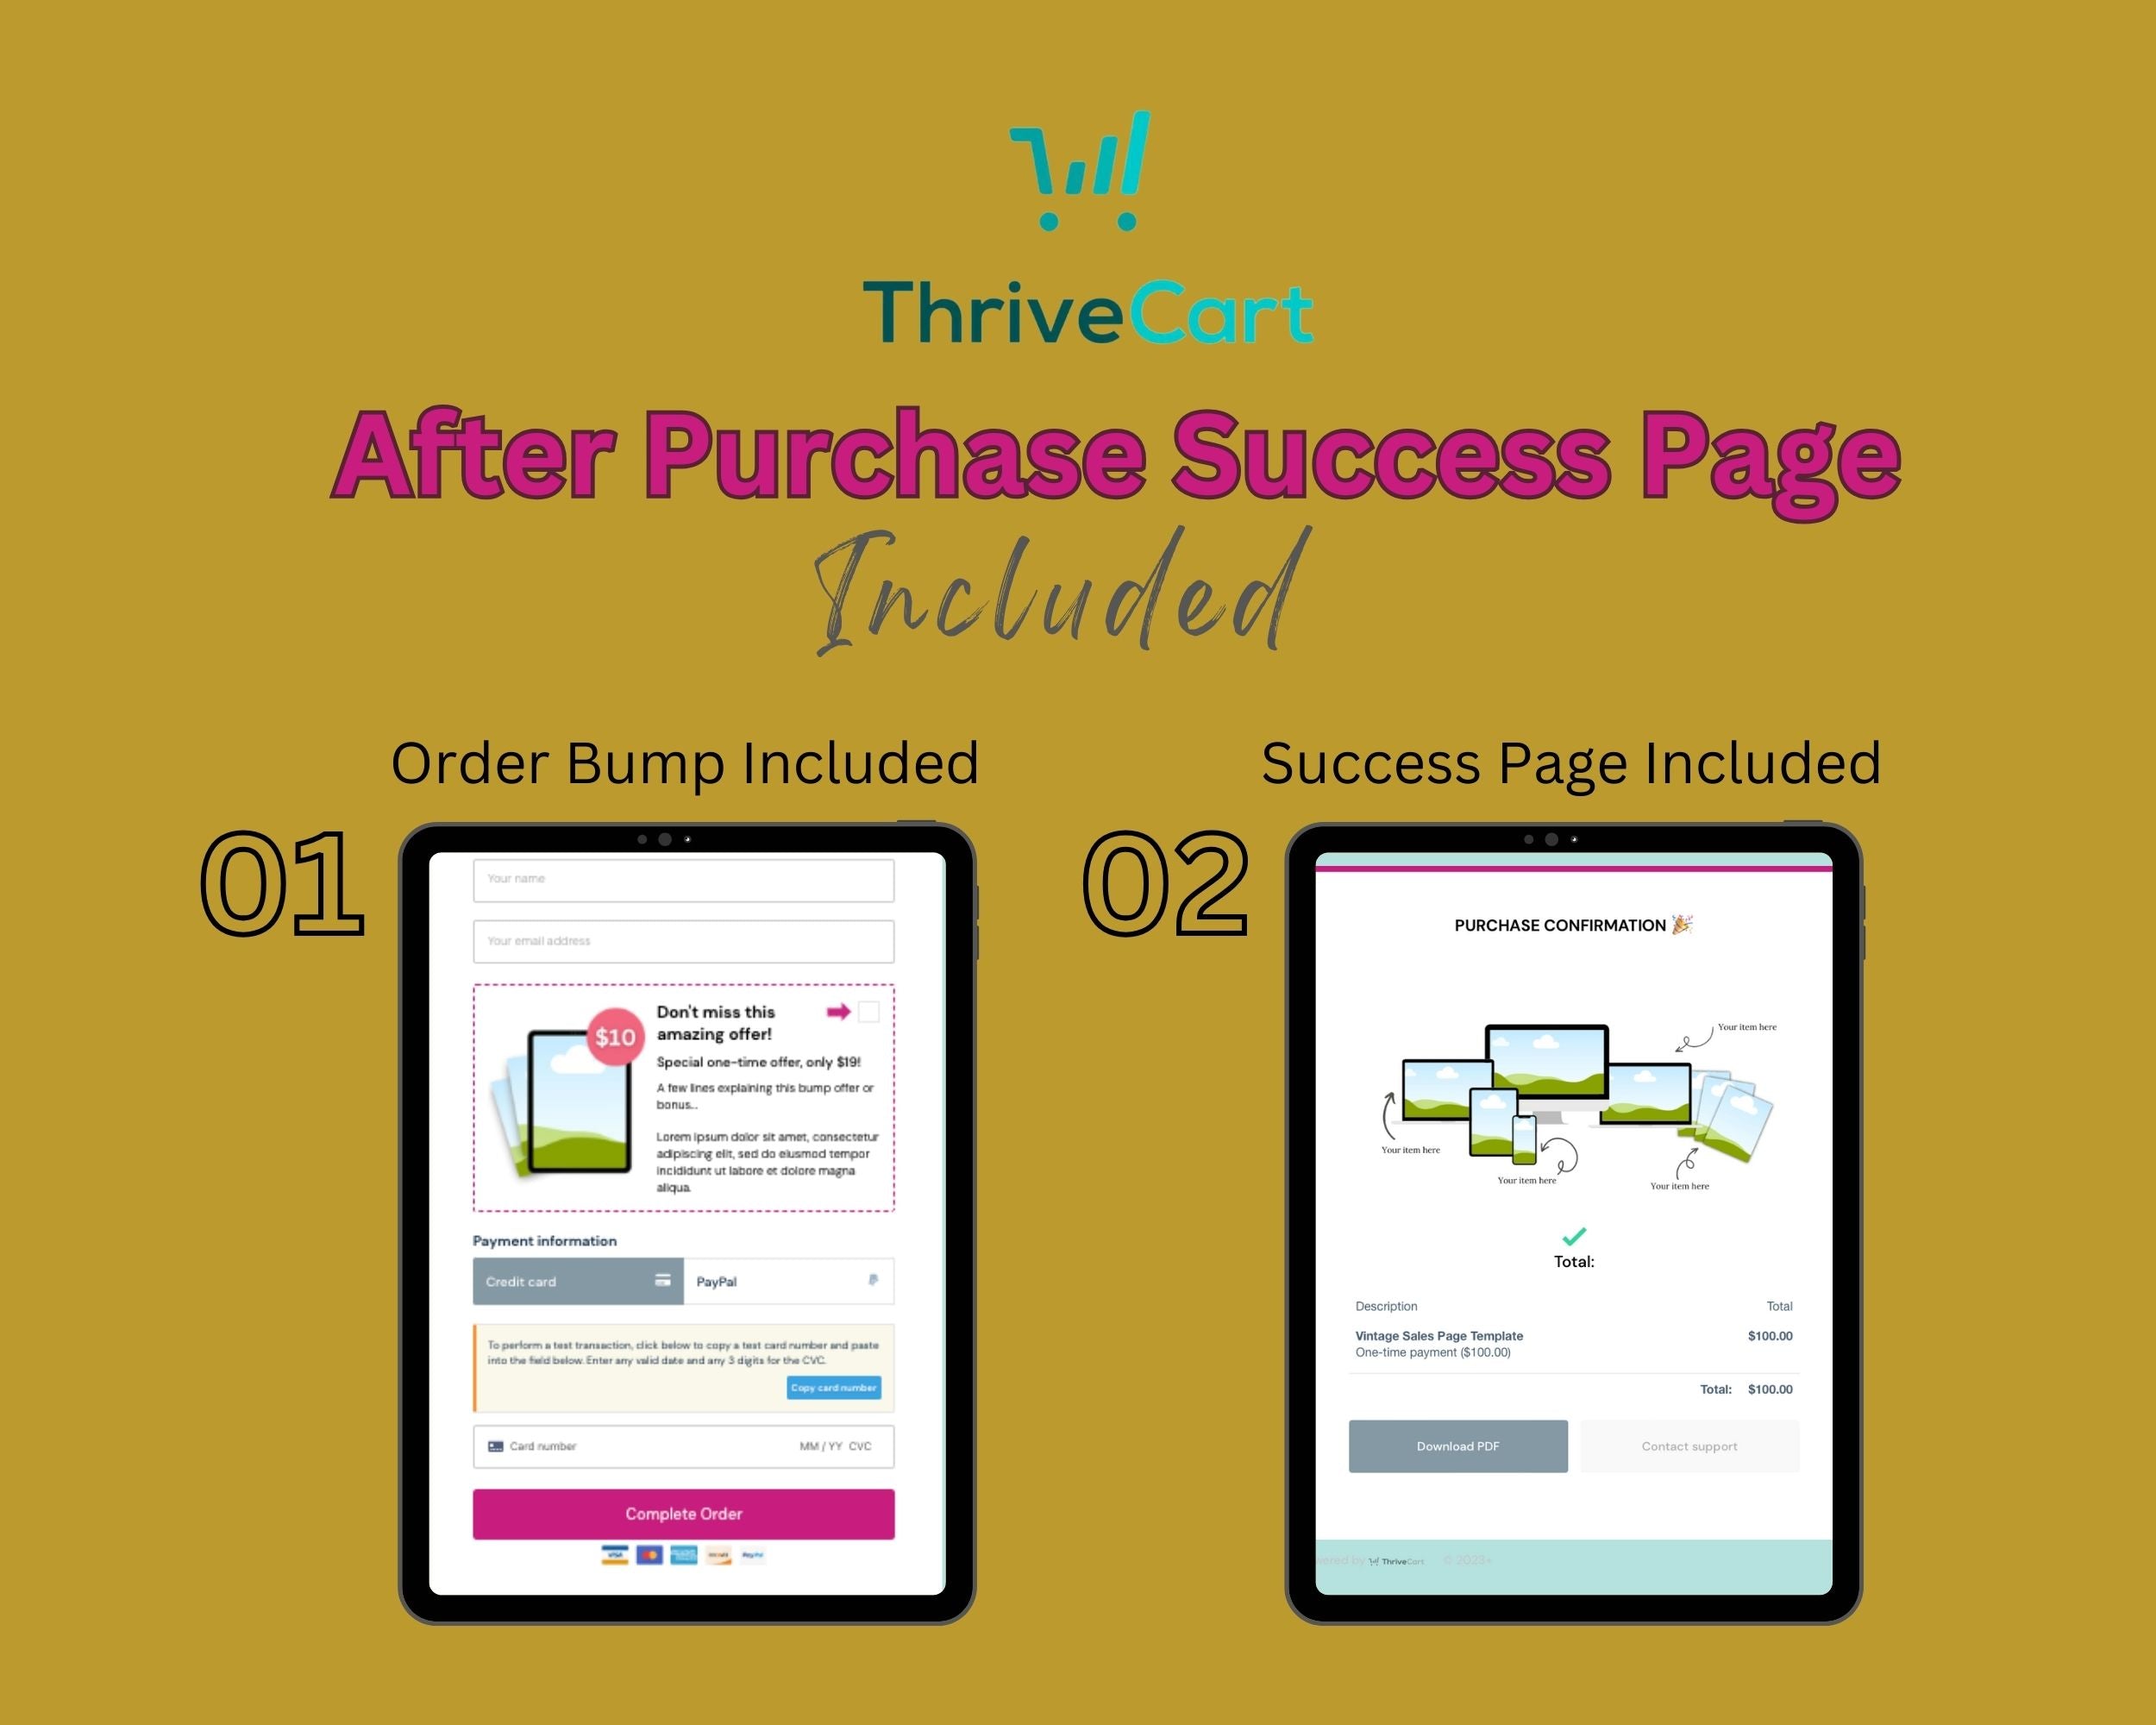 Vintage Sales Page Template in ThriveCart